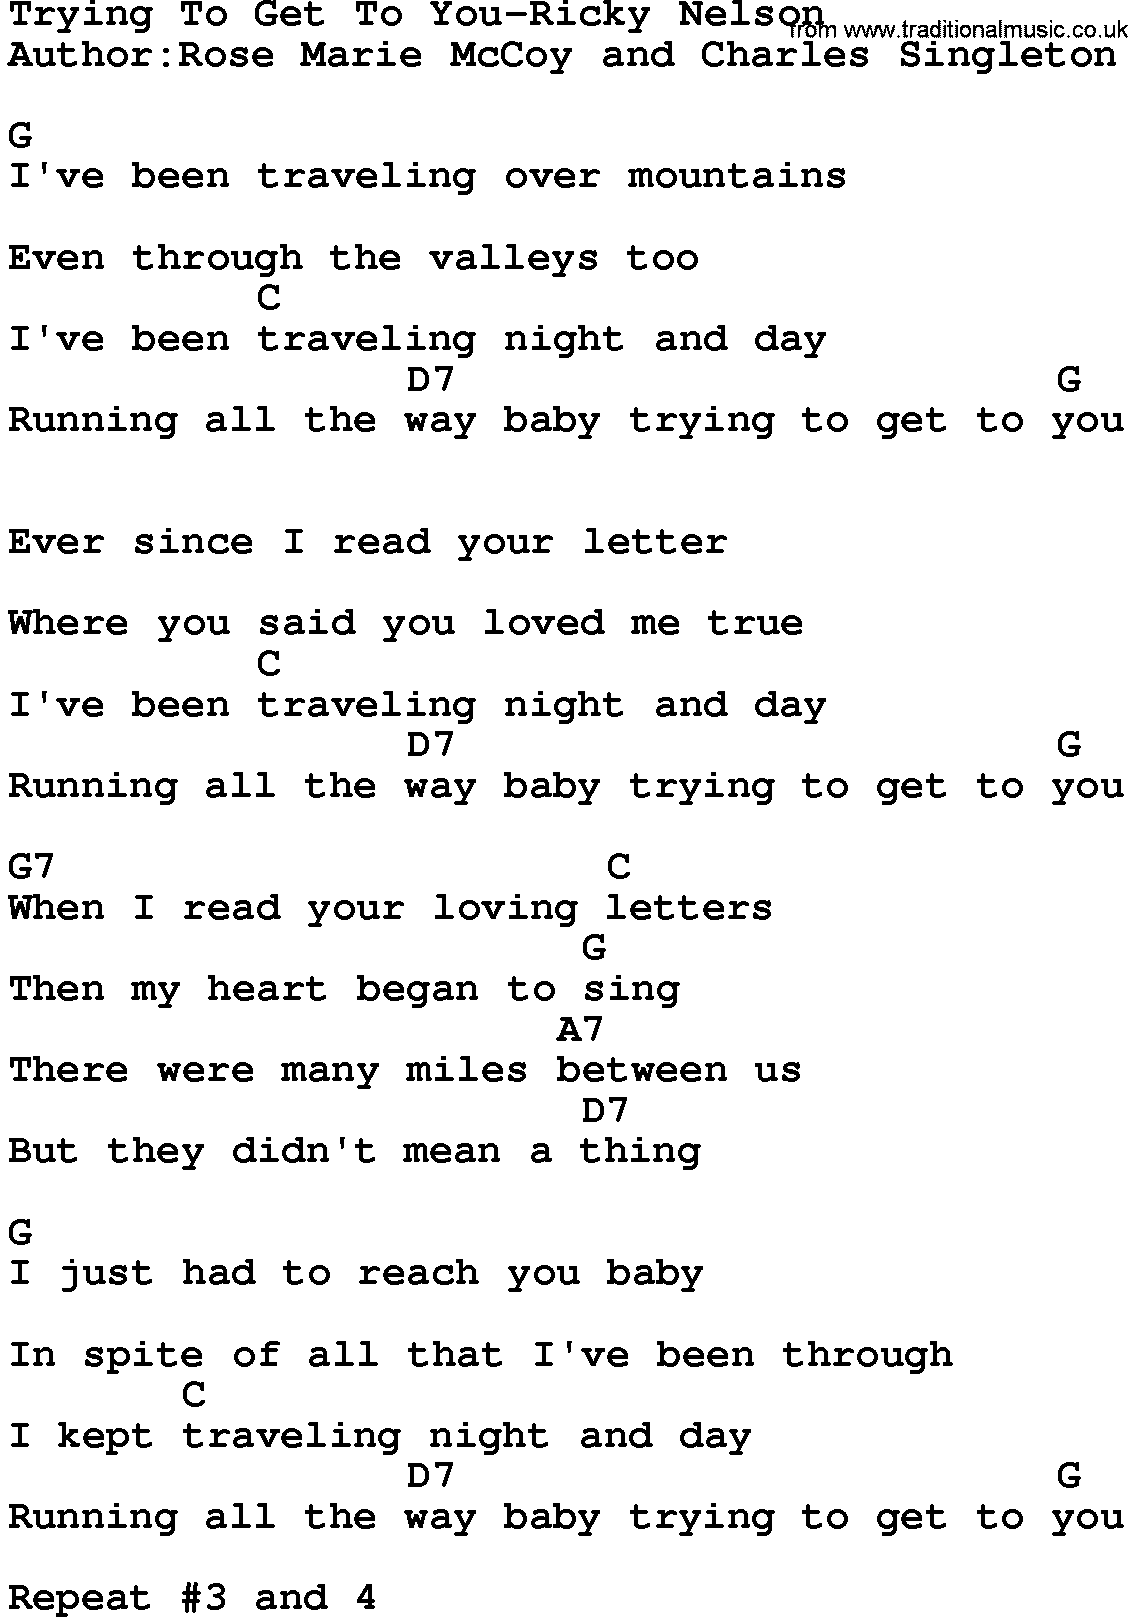 Country music song: Trying To Get To You-Ricky Nelson lyrics and chords